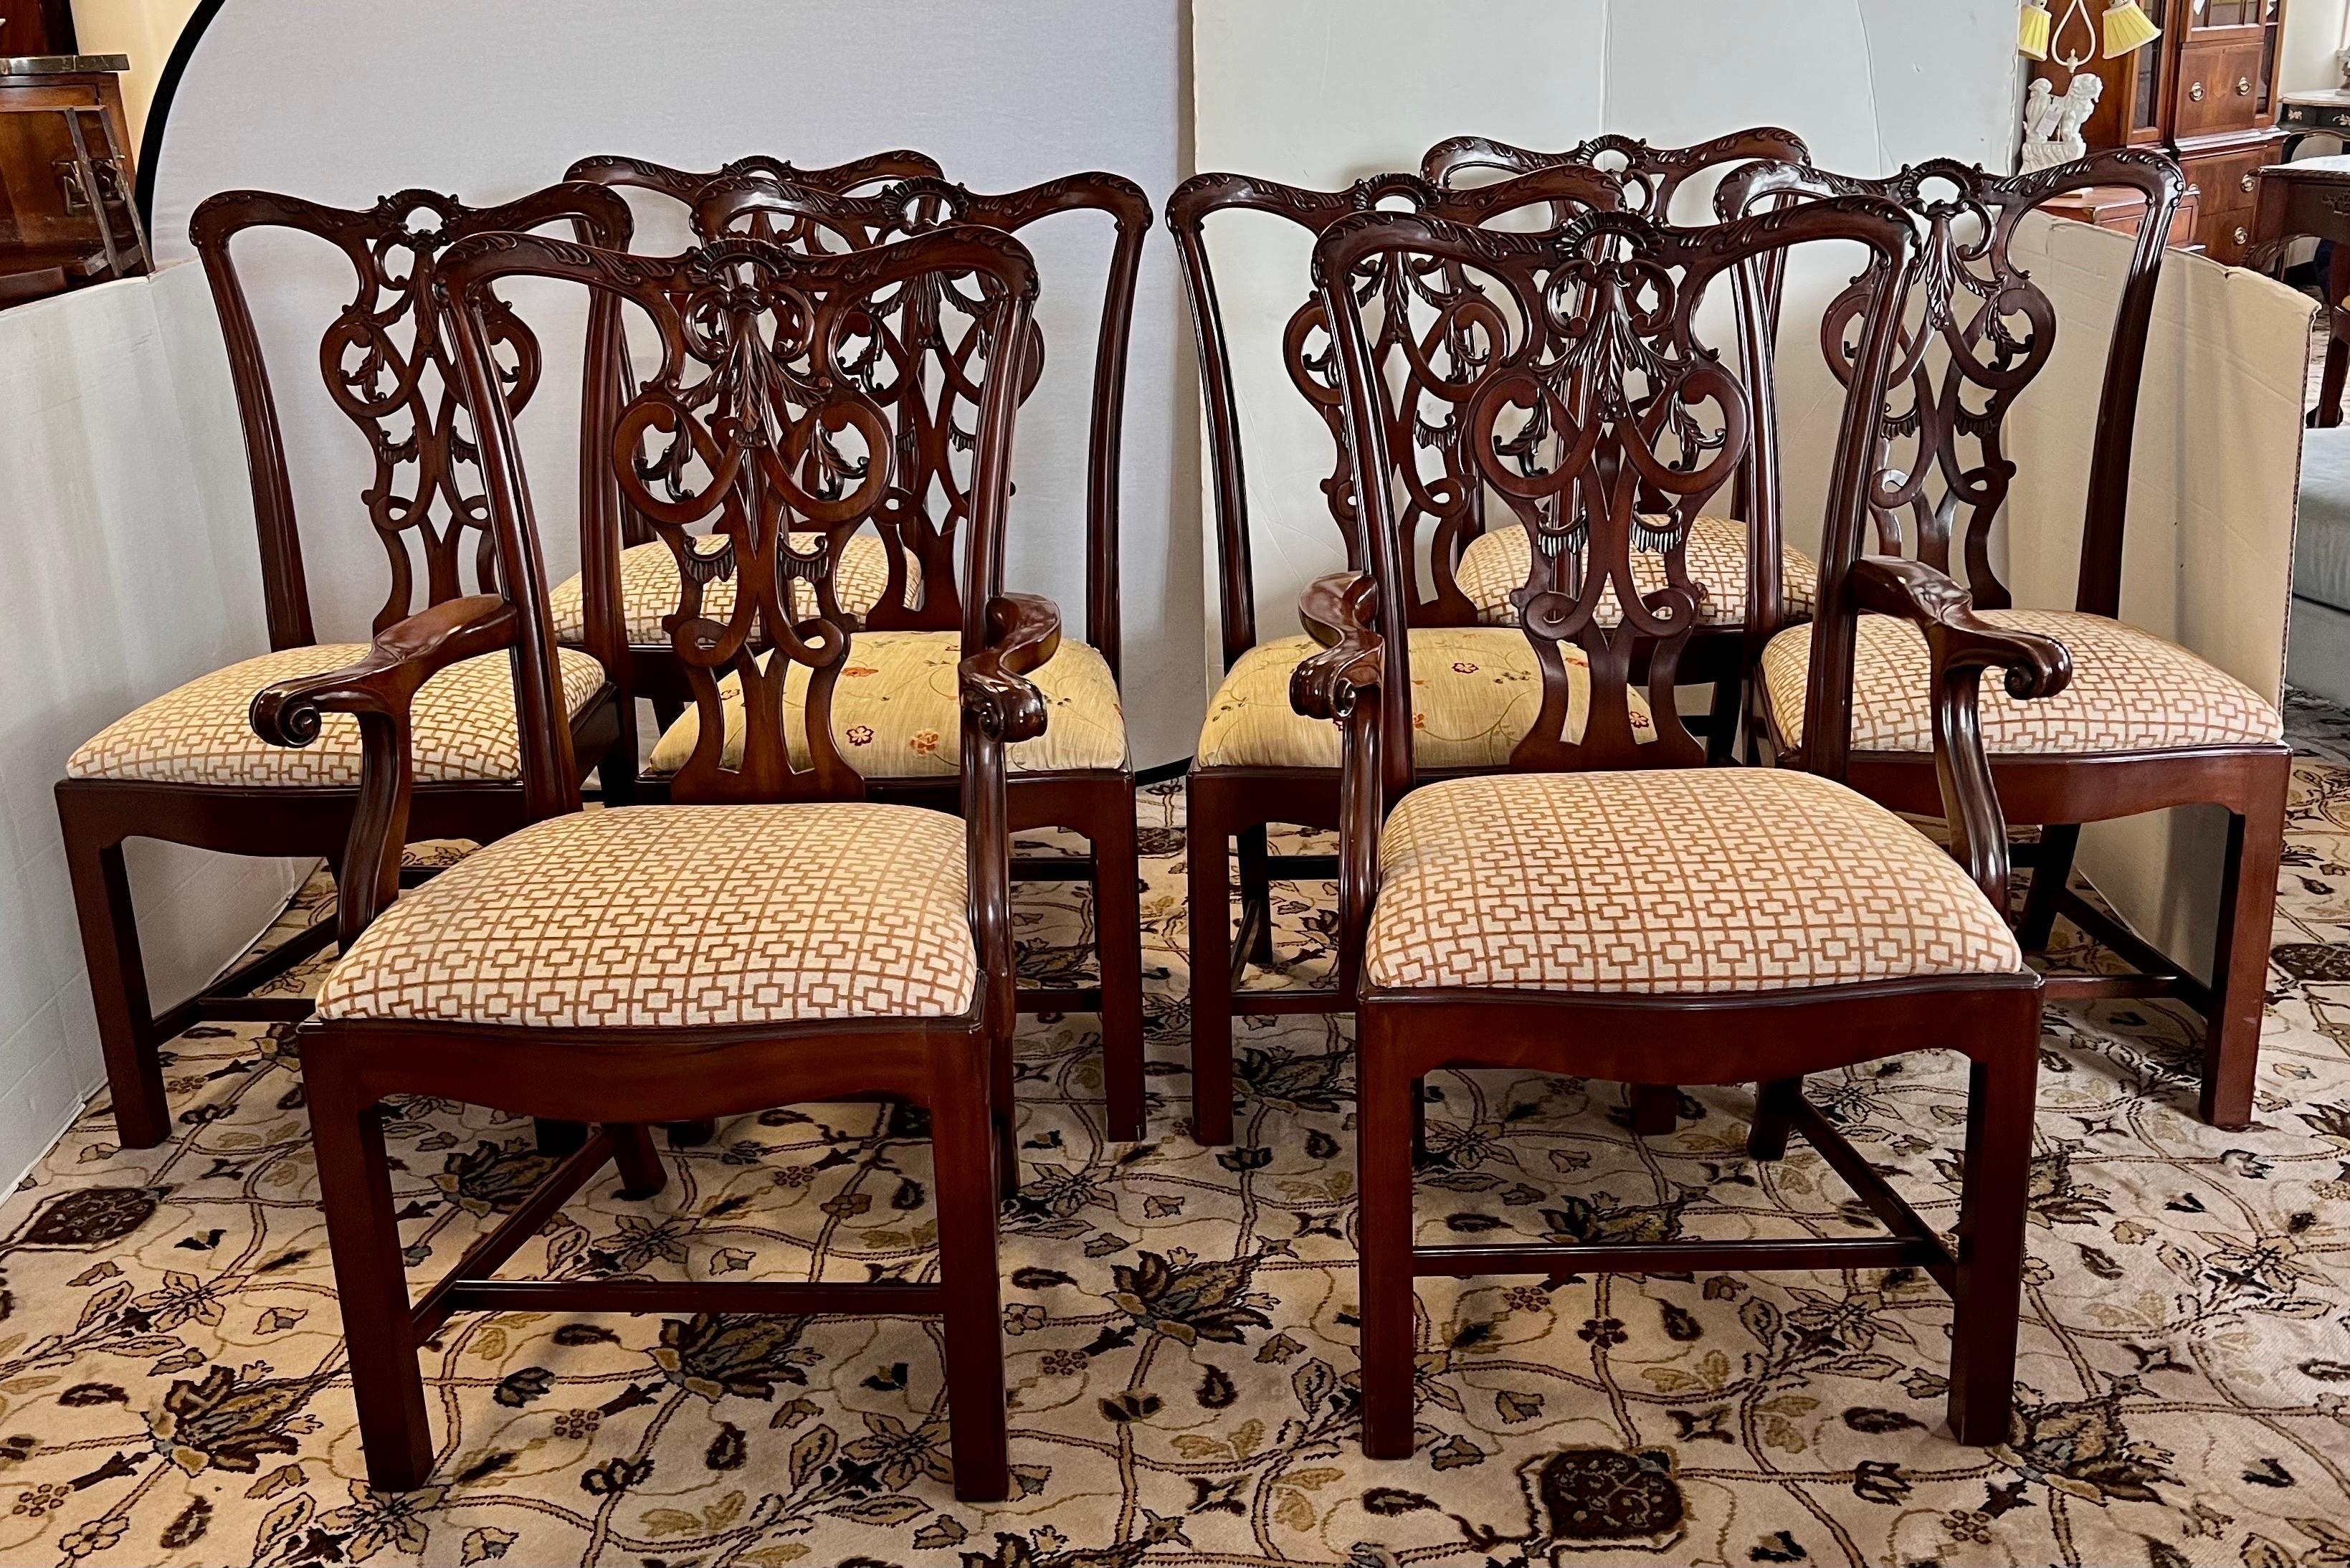 Each chair features meticulous carved details, showcasing the artistry and craftsmanship of Henredon. With their luxe upholstery and sturdy construction, these chairs provide both comfort and durability for your dining experience. 
Includes 6 side